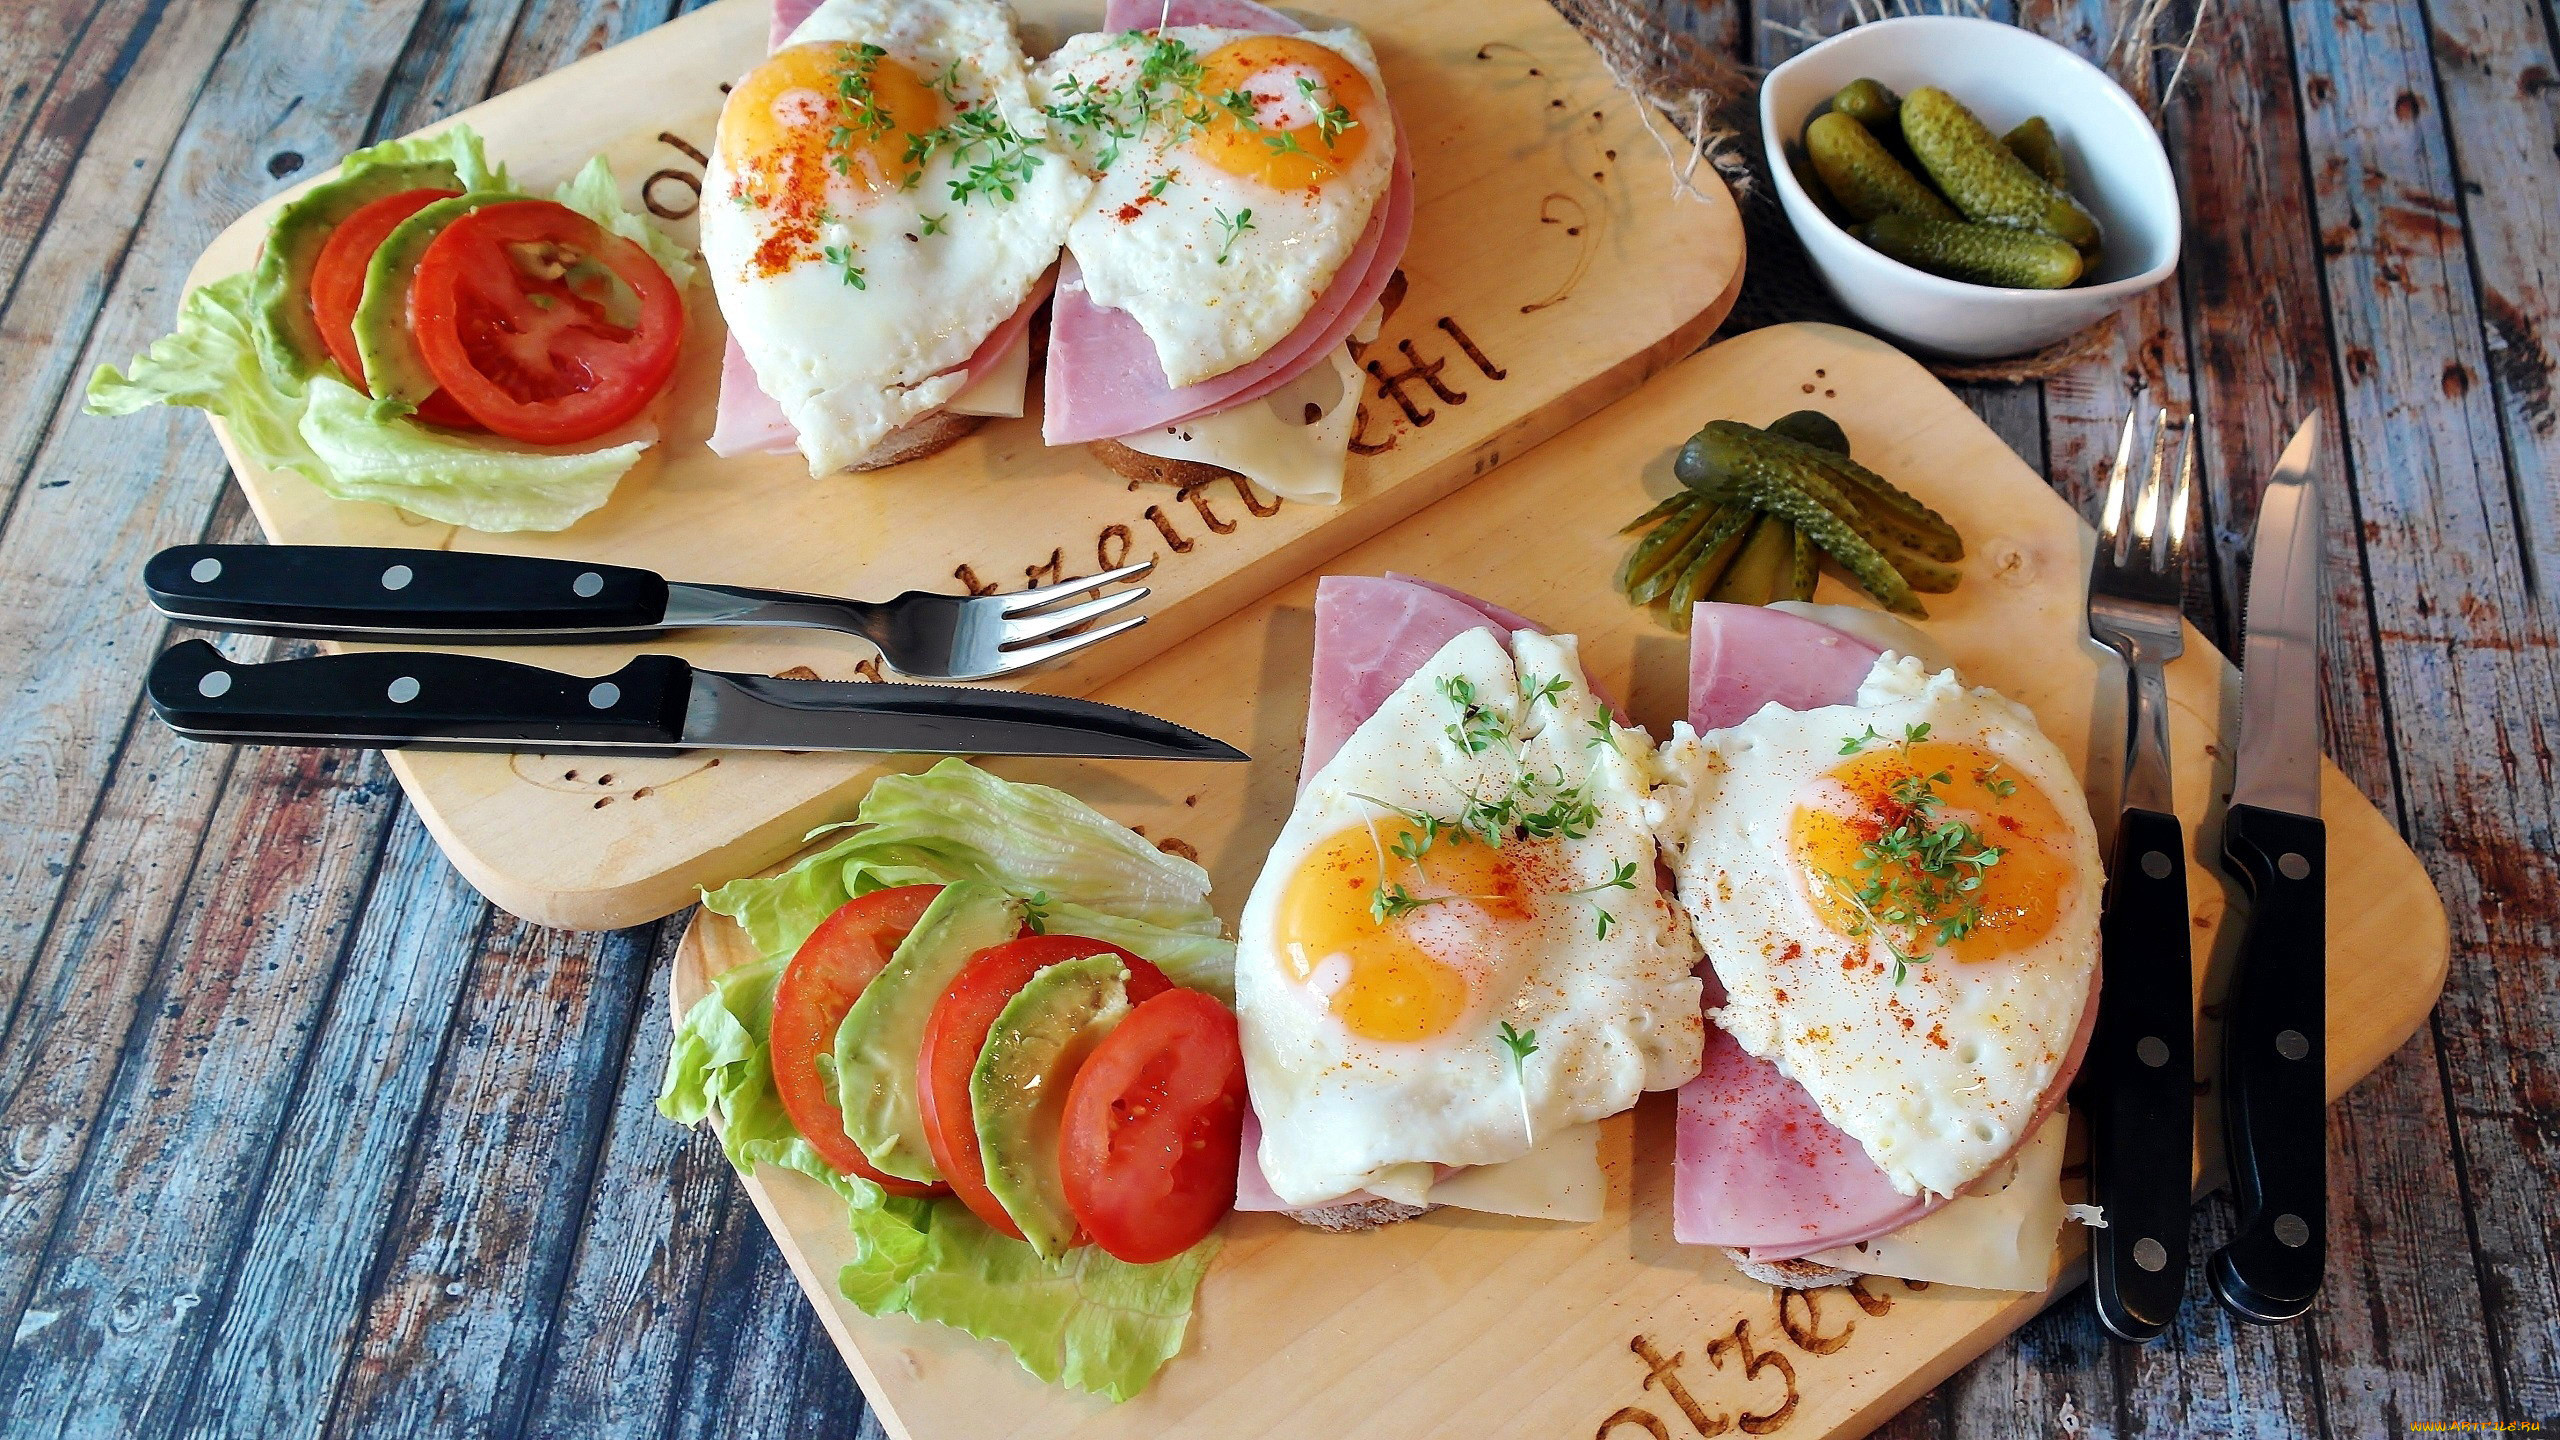 General 2560x1440 food eggs tomatoes breakfast wooden surface cutting board fork table knife lettuce cheese ham bread pickles wood closeup